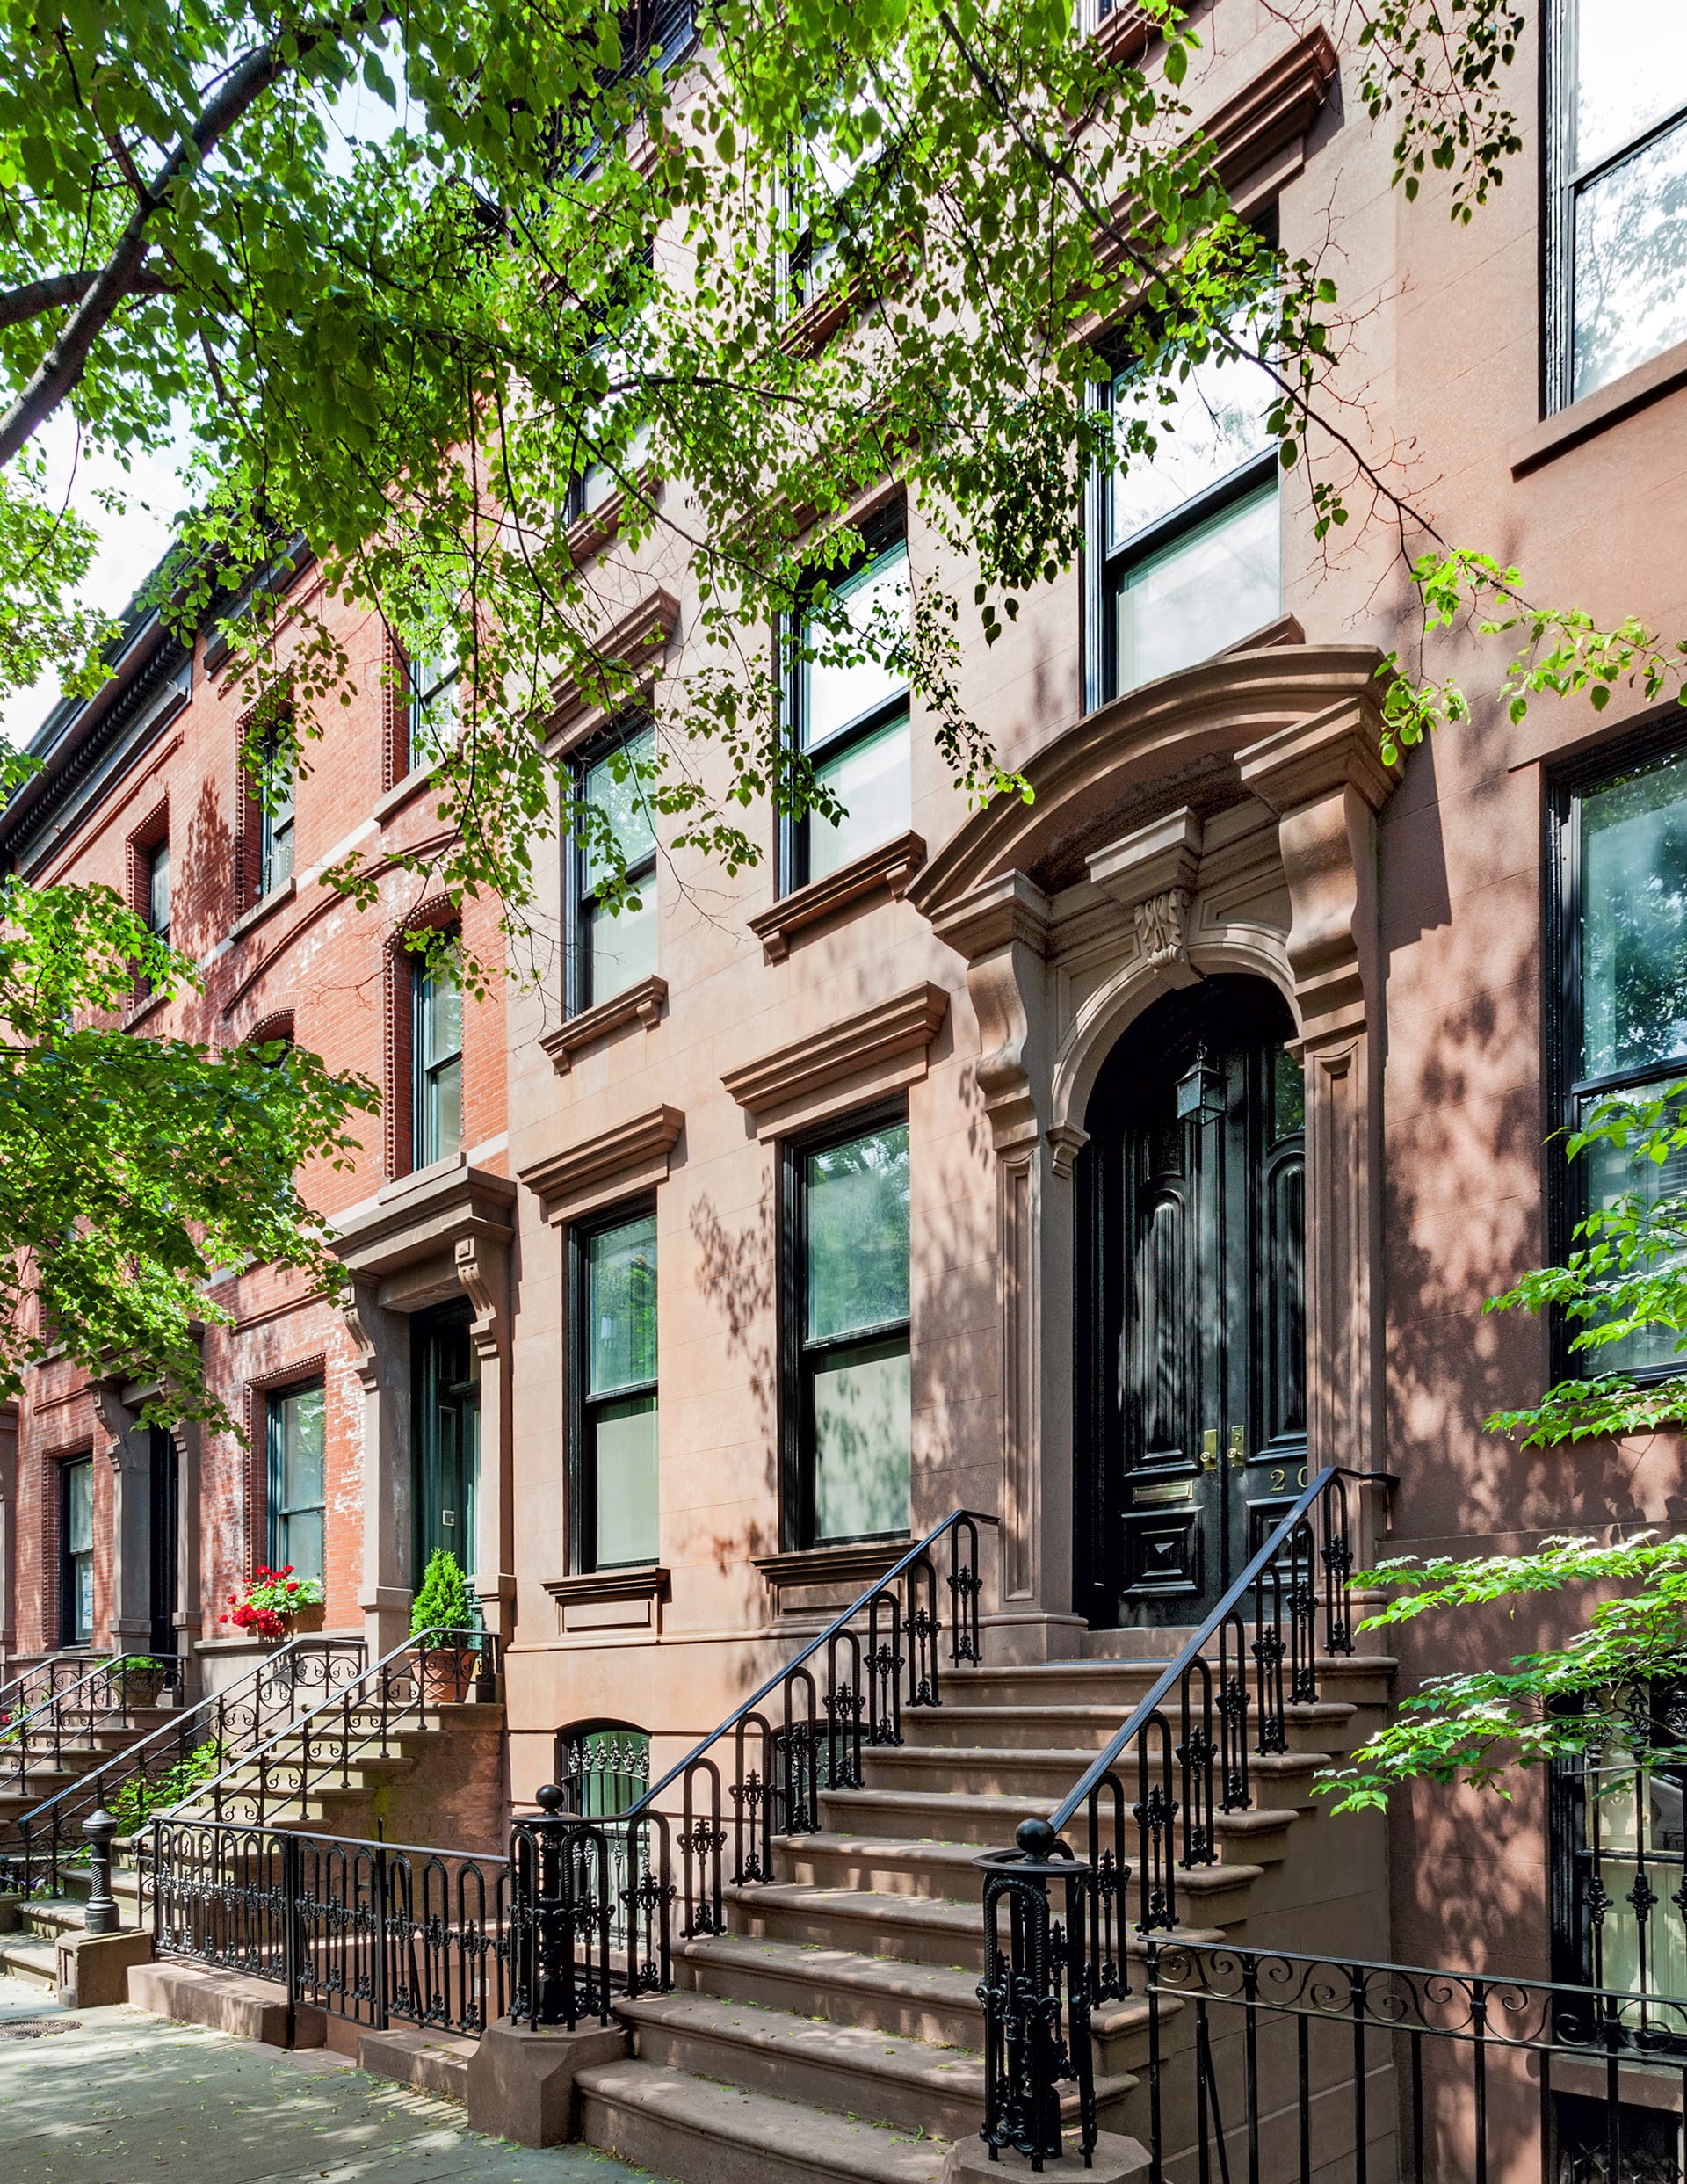 Restored front facade of a historic Brooklyn Heights brownstone with black front doors, a stoop, and ironwork railings.